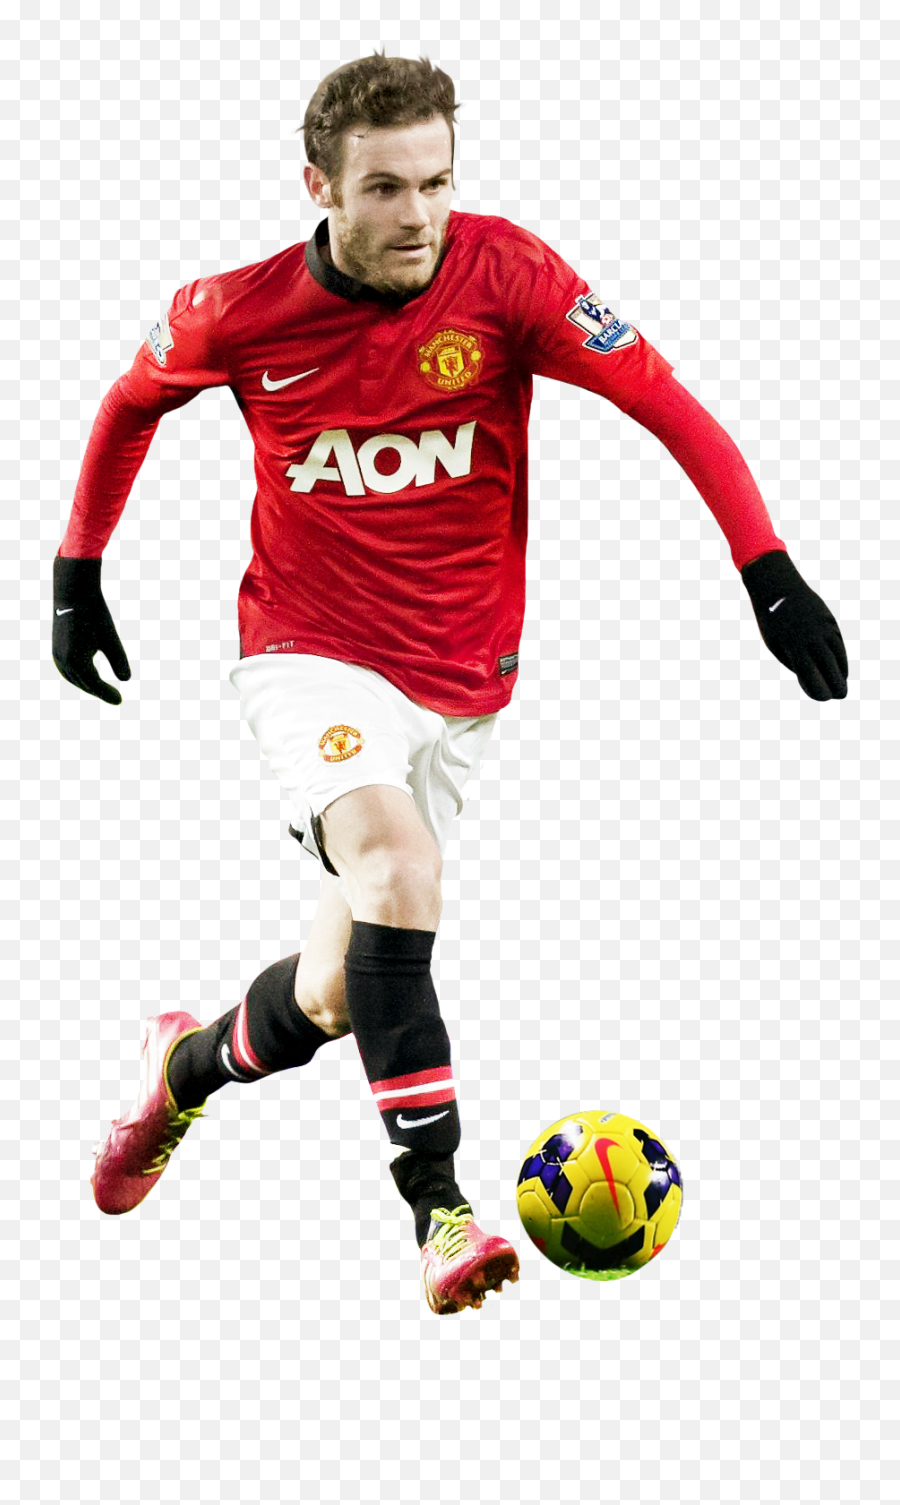 Manchester United Png Image - Manchester United,Manchester United Png